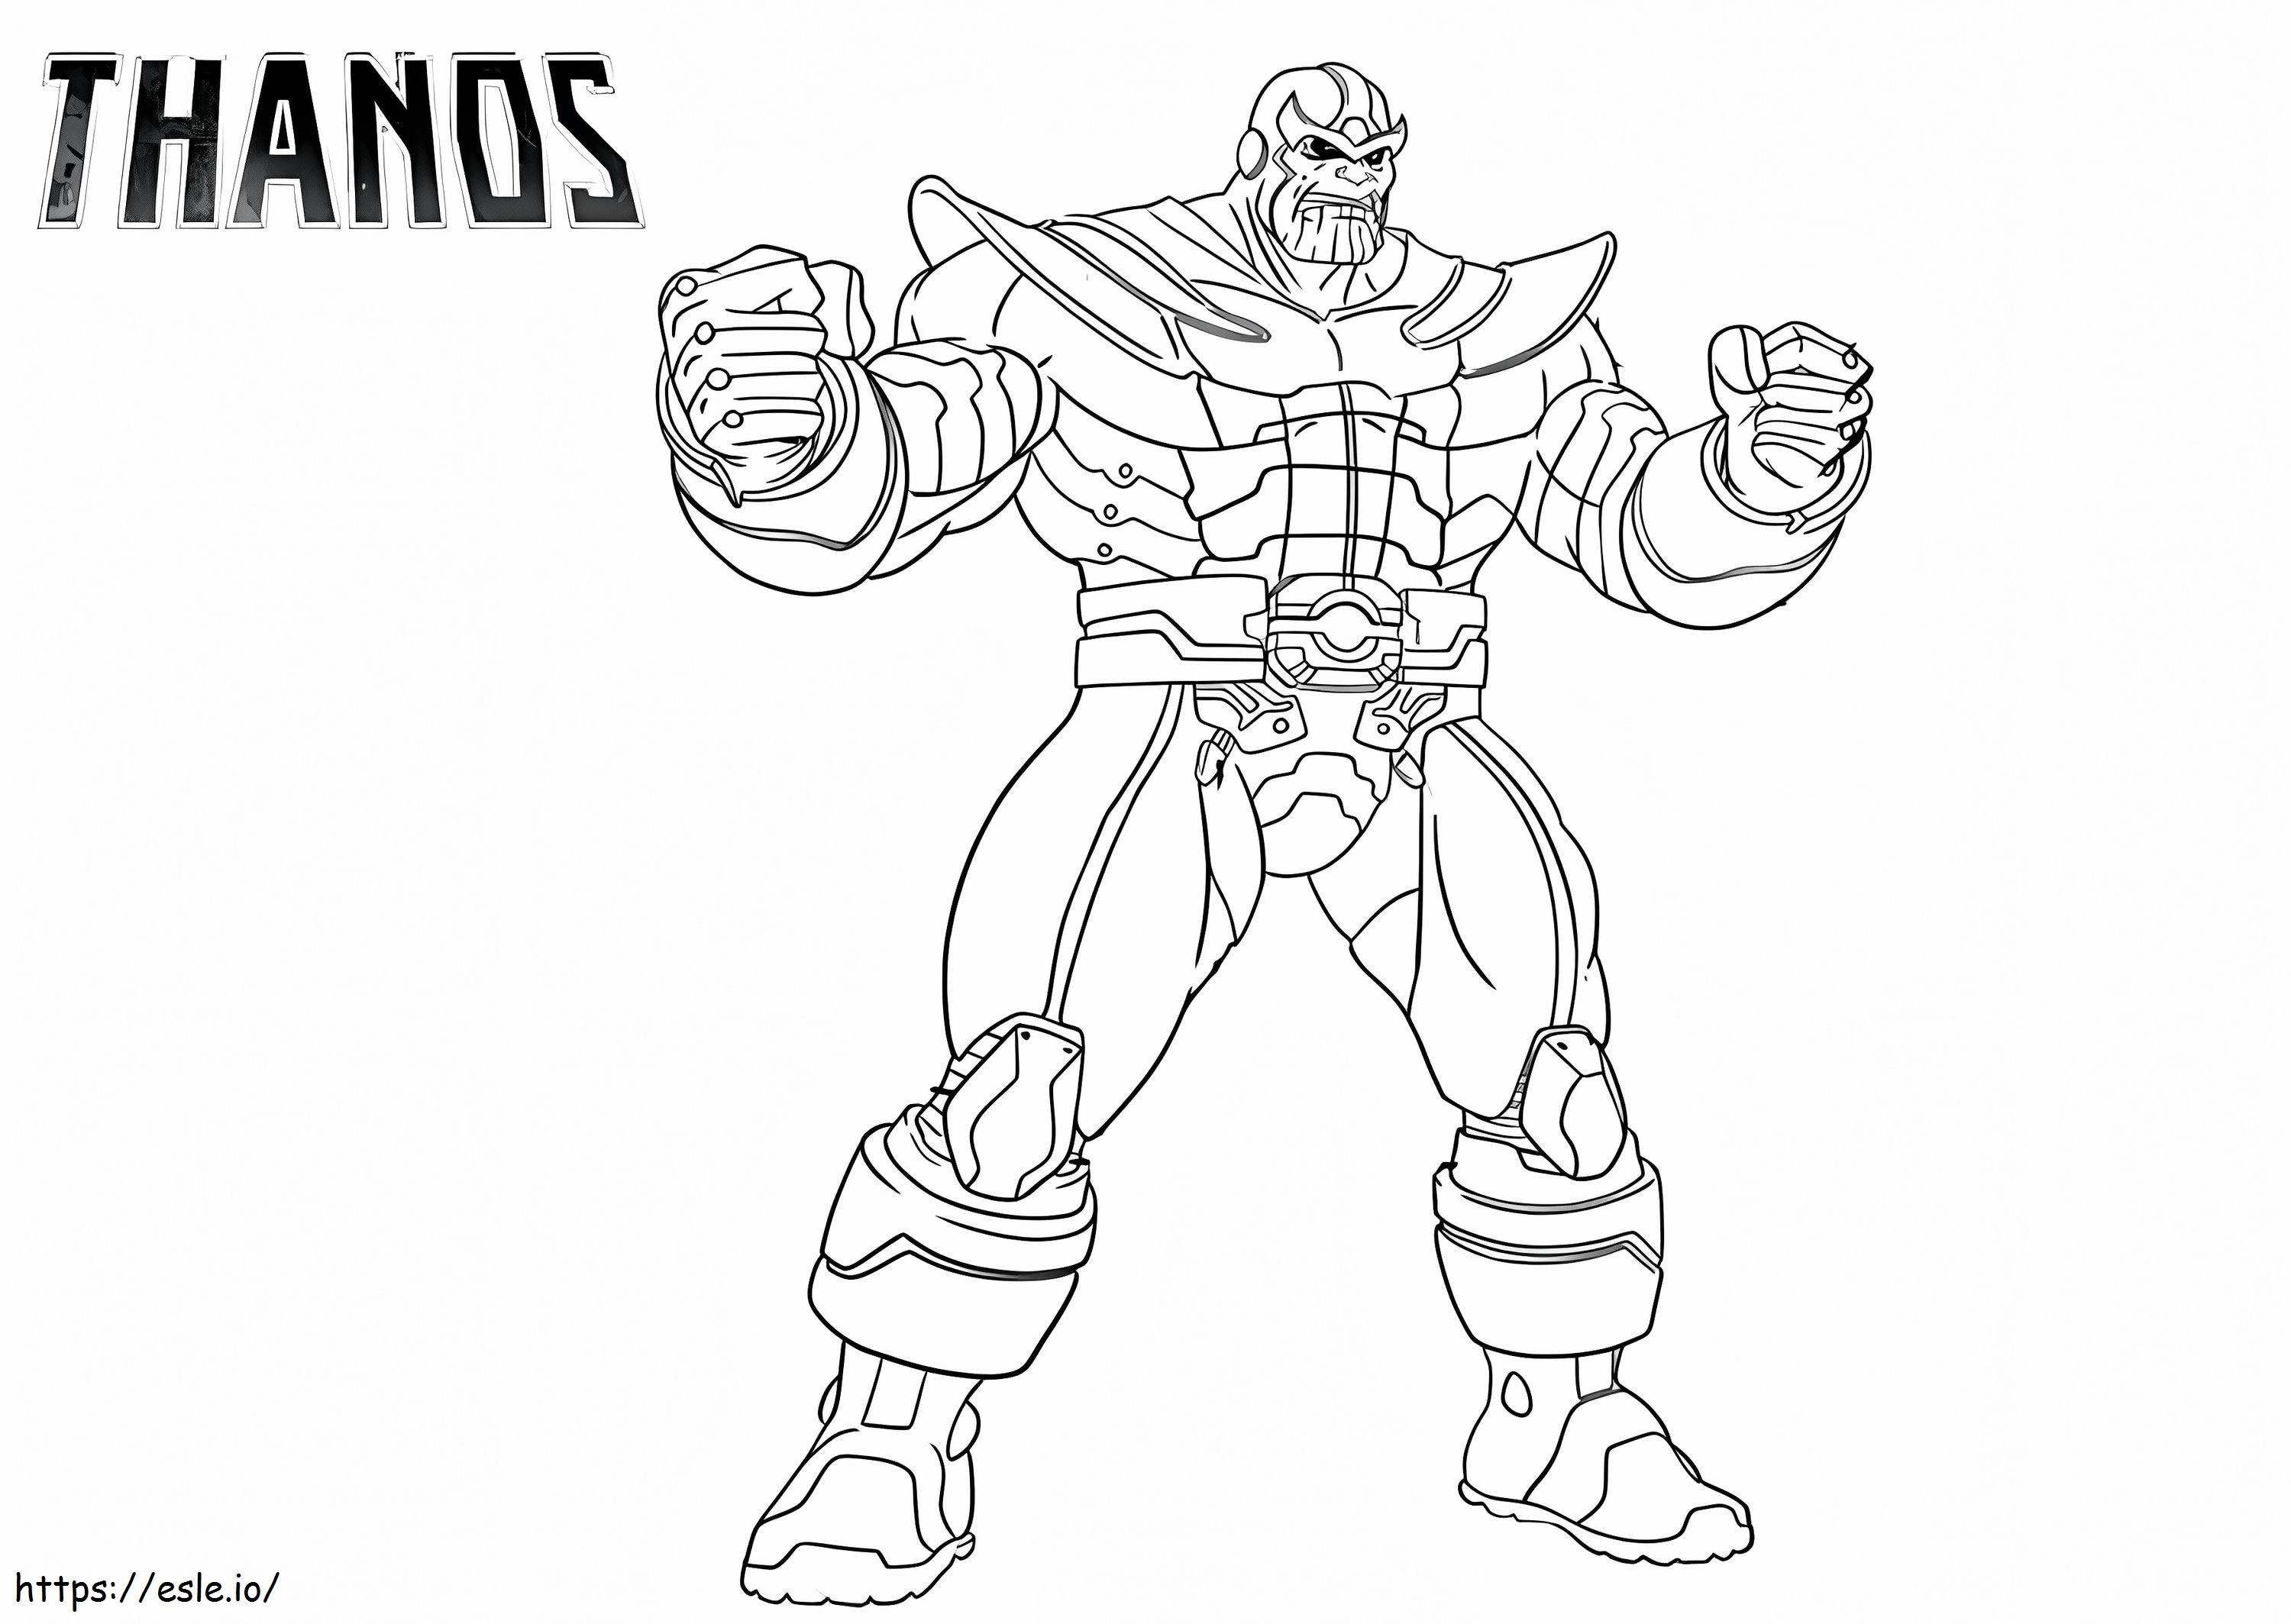 Thanos 1 coloring page